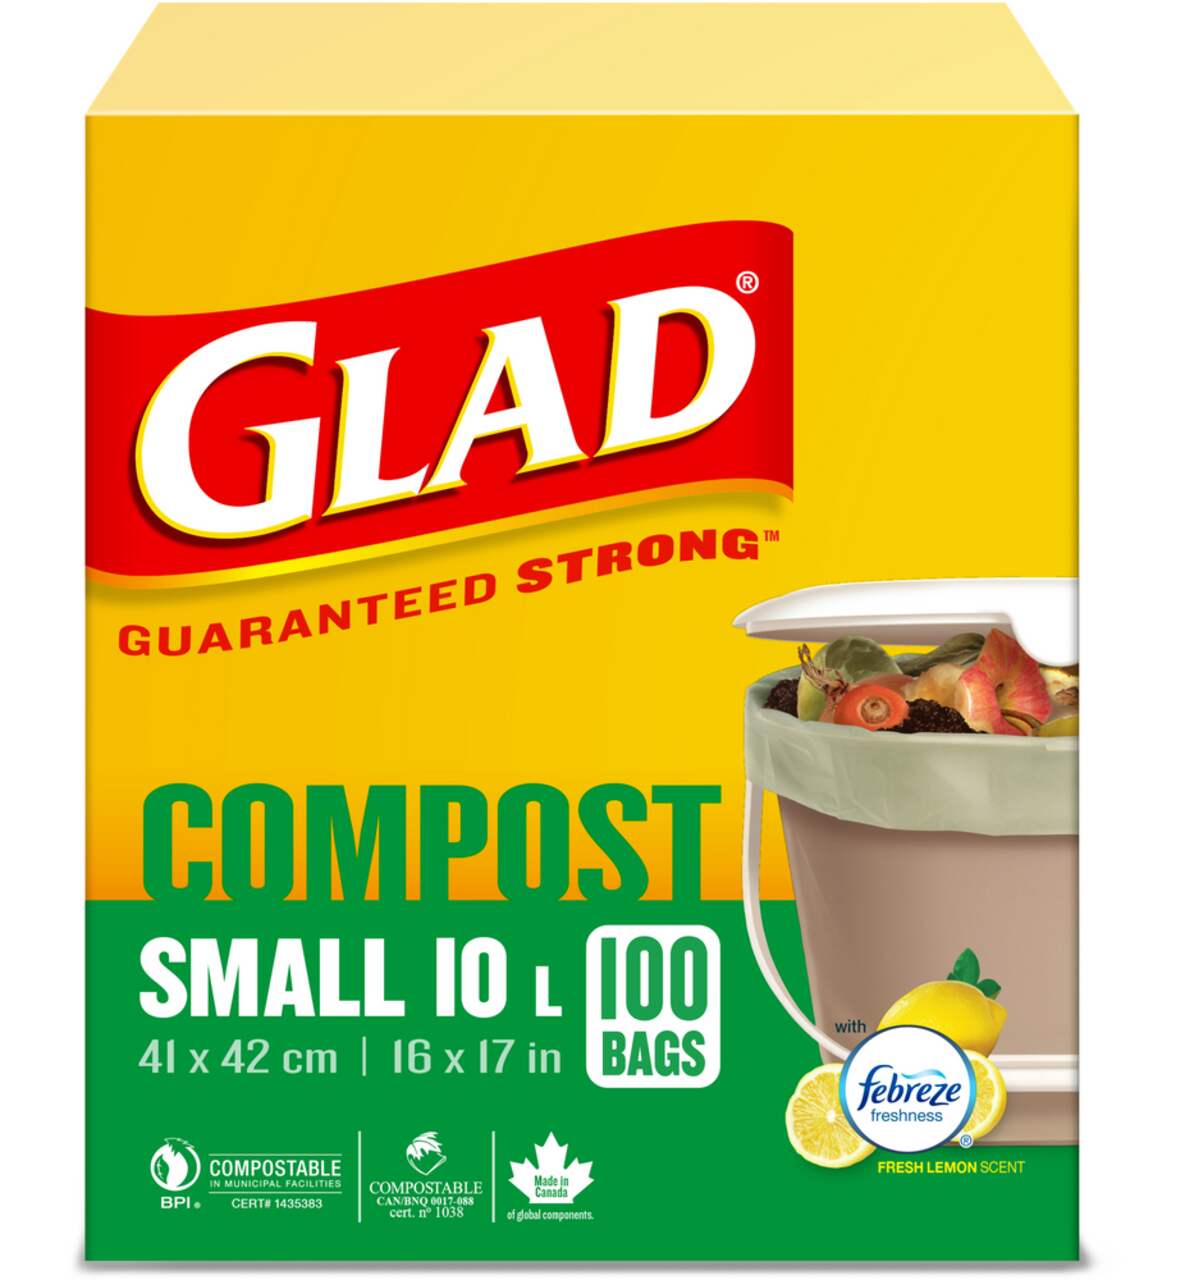 https://media-www.canadiantire.ca/product/living/cleaning/refuse-bags/1429017/glad-compostable-bags-lemon-scent-small-100pk-10l-d8f95b1b-aeea-4350-a4ad-890f105265d7.png?imdensity=1&imwidth=640&impolicy=mZoom